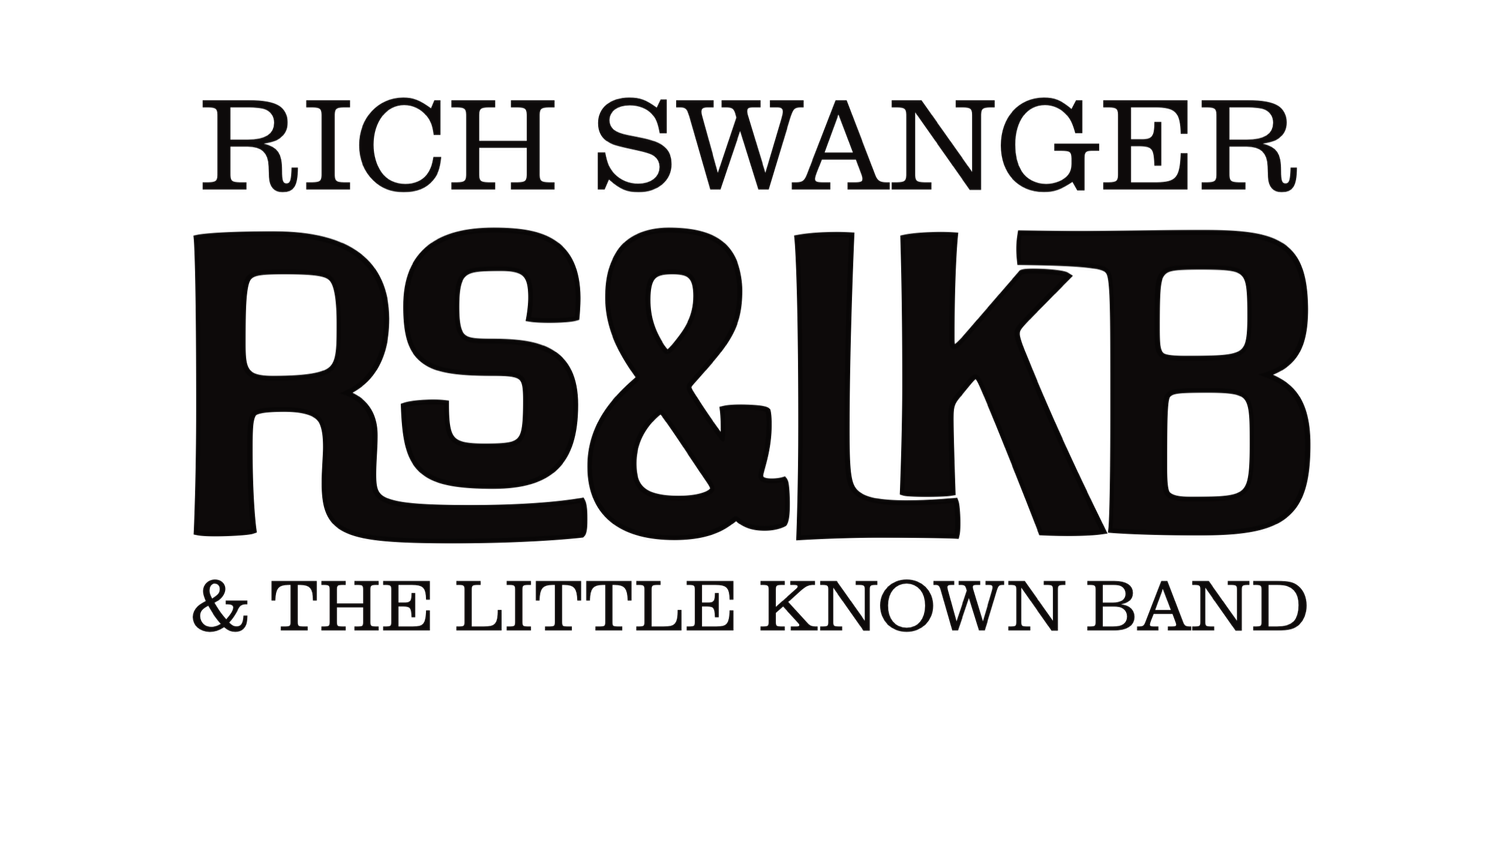 RICH SWANGER & THE LITTLE KNOWN BAND